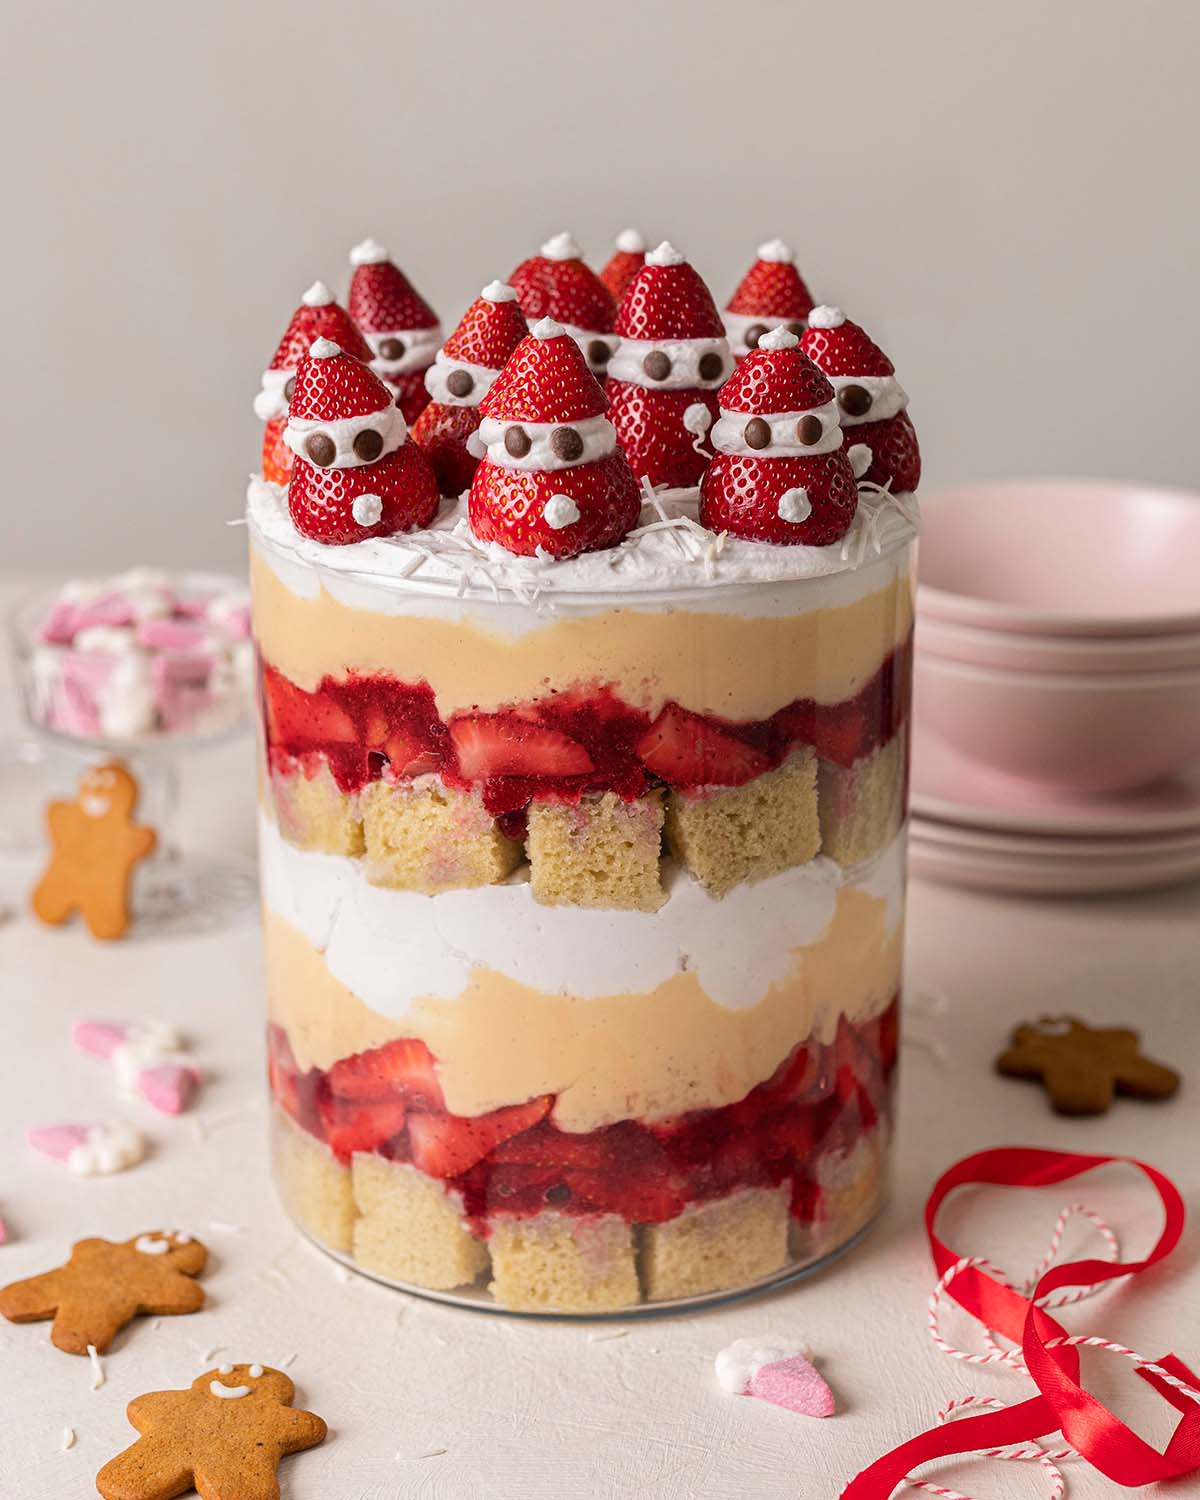 Trifle with layers of cubed cake, jammy strawberries, creamy custard and cream, topped with strawberries decorated as mini Santas.